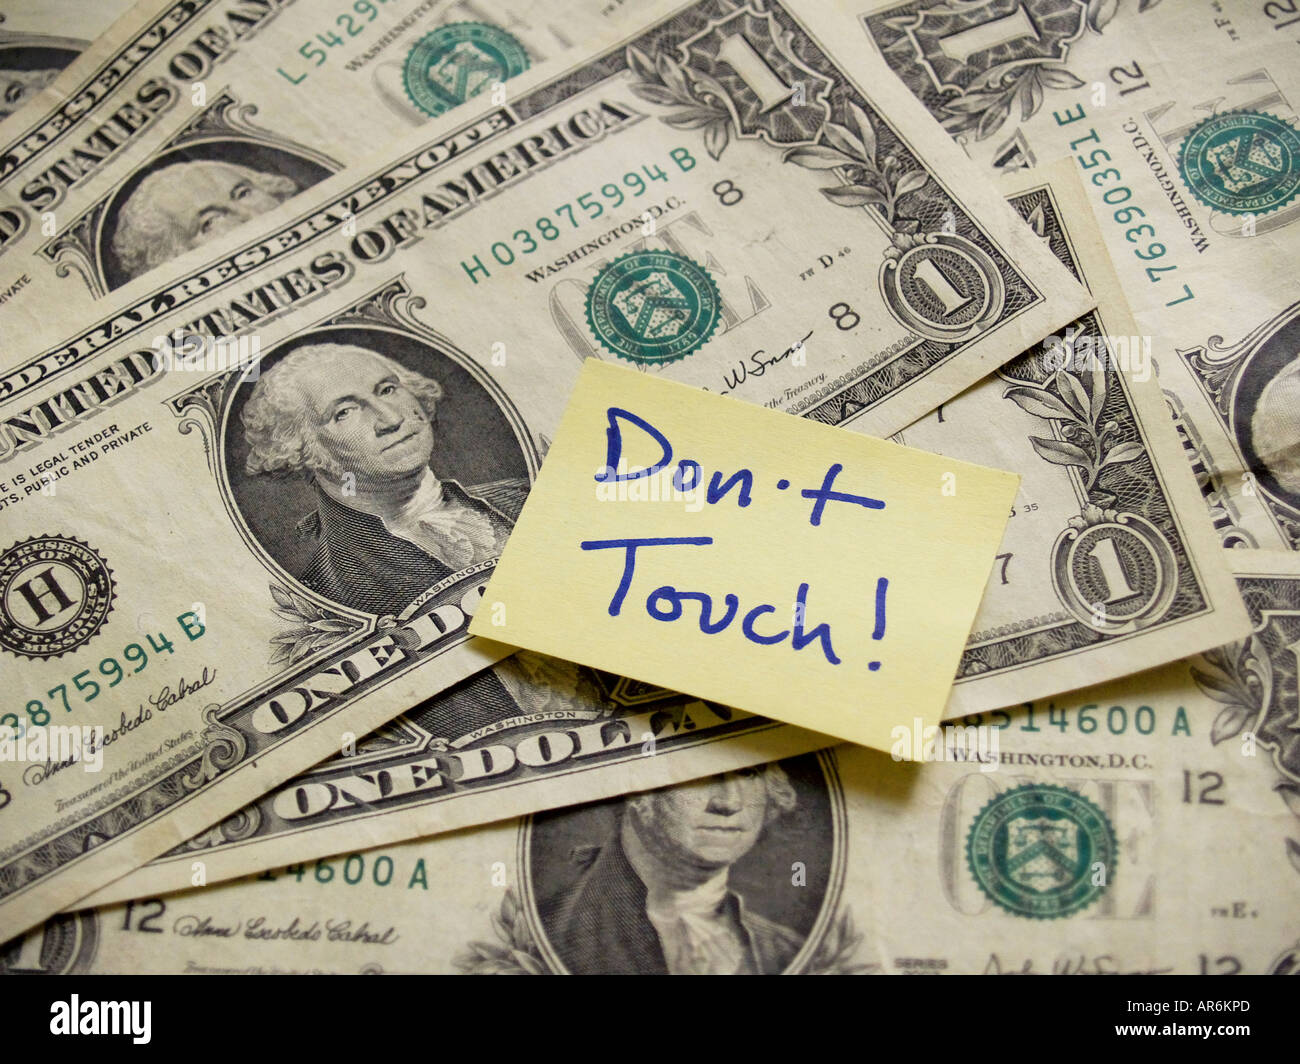 Yellow post-it sticky note containing the words DON'T TOUCH stuck on a background of dollar bills. Stock Photo